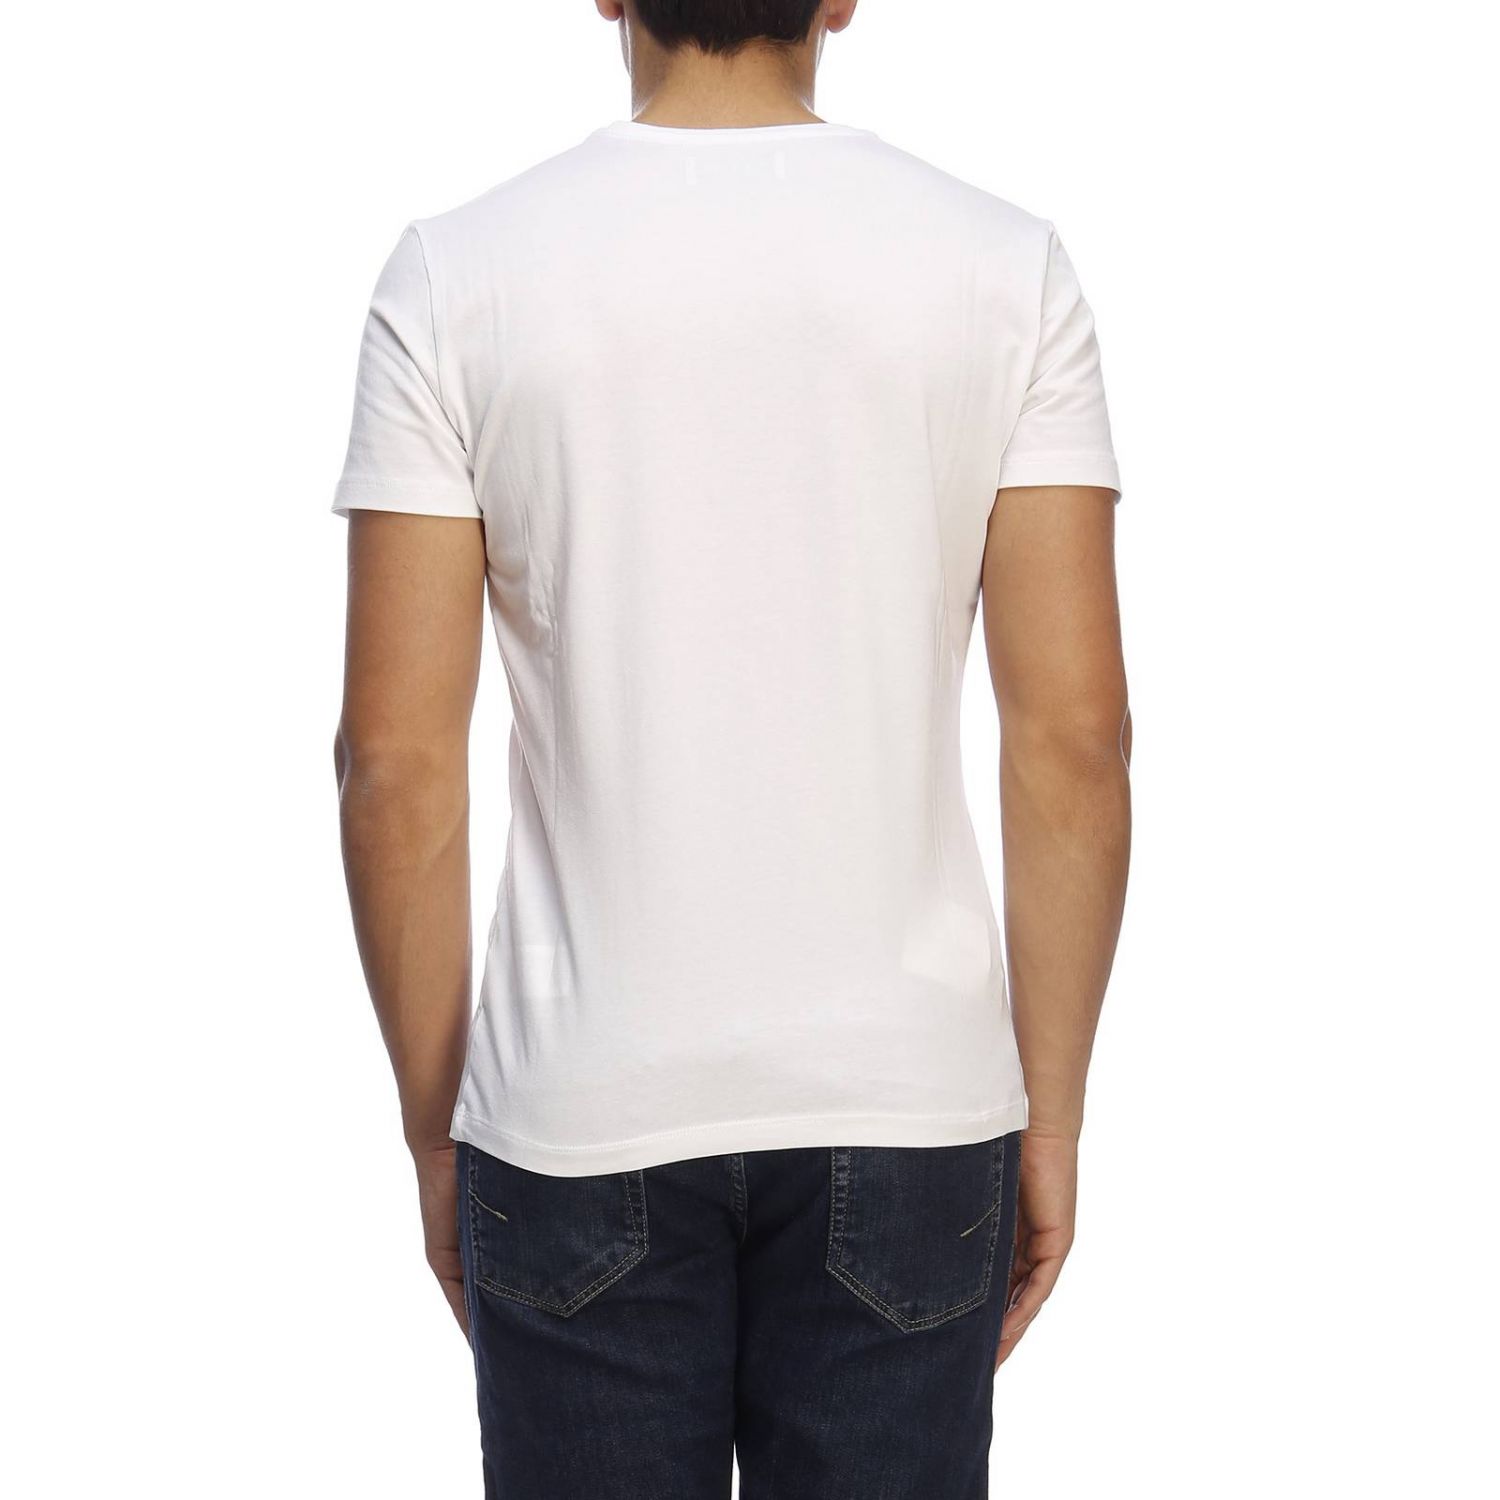 Ice Play Outlet: T-shirt men - White | T-Shirt Ice Play F012 P410 ...